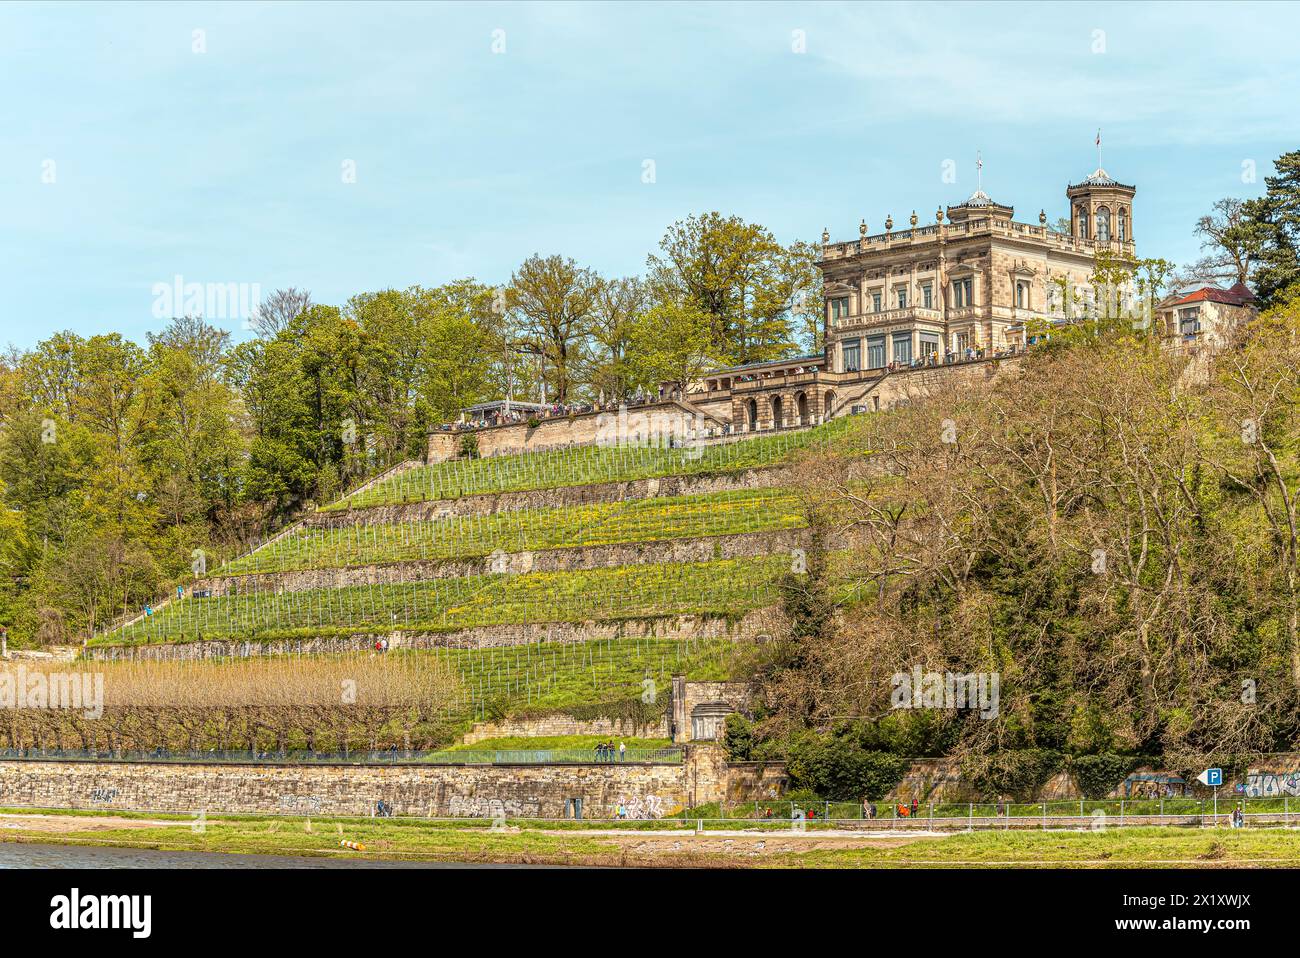 Villa Stockhausen (Lingnerschloss), one of the three Elbe castles in the Elbe valley of Dresden seen from the opposite bank of the Elbe, Saxony, Germa Stock Photo